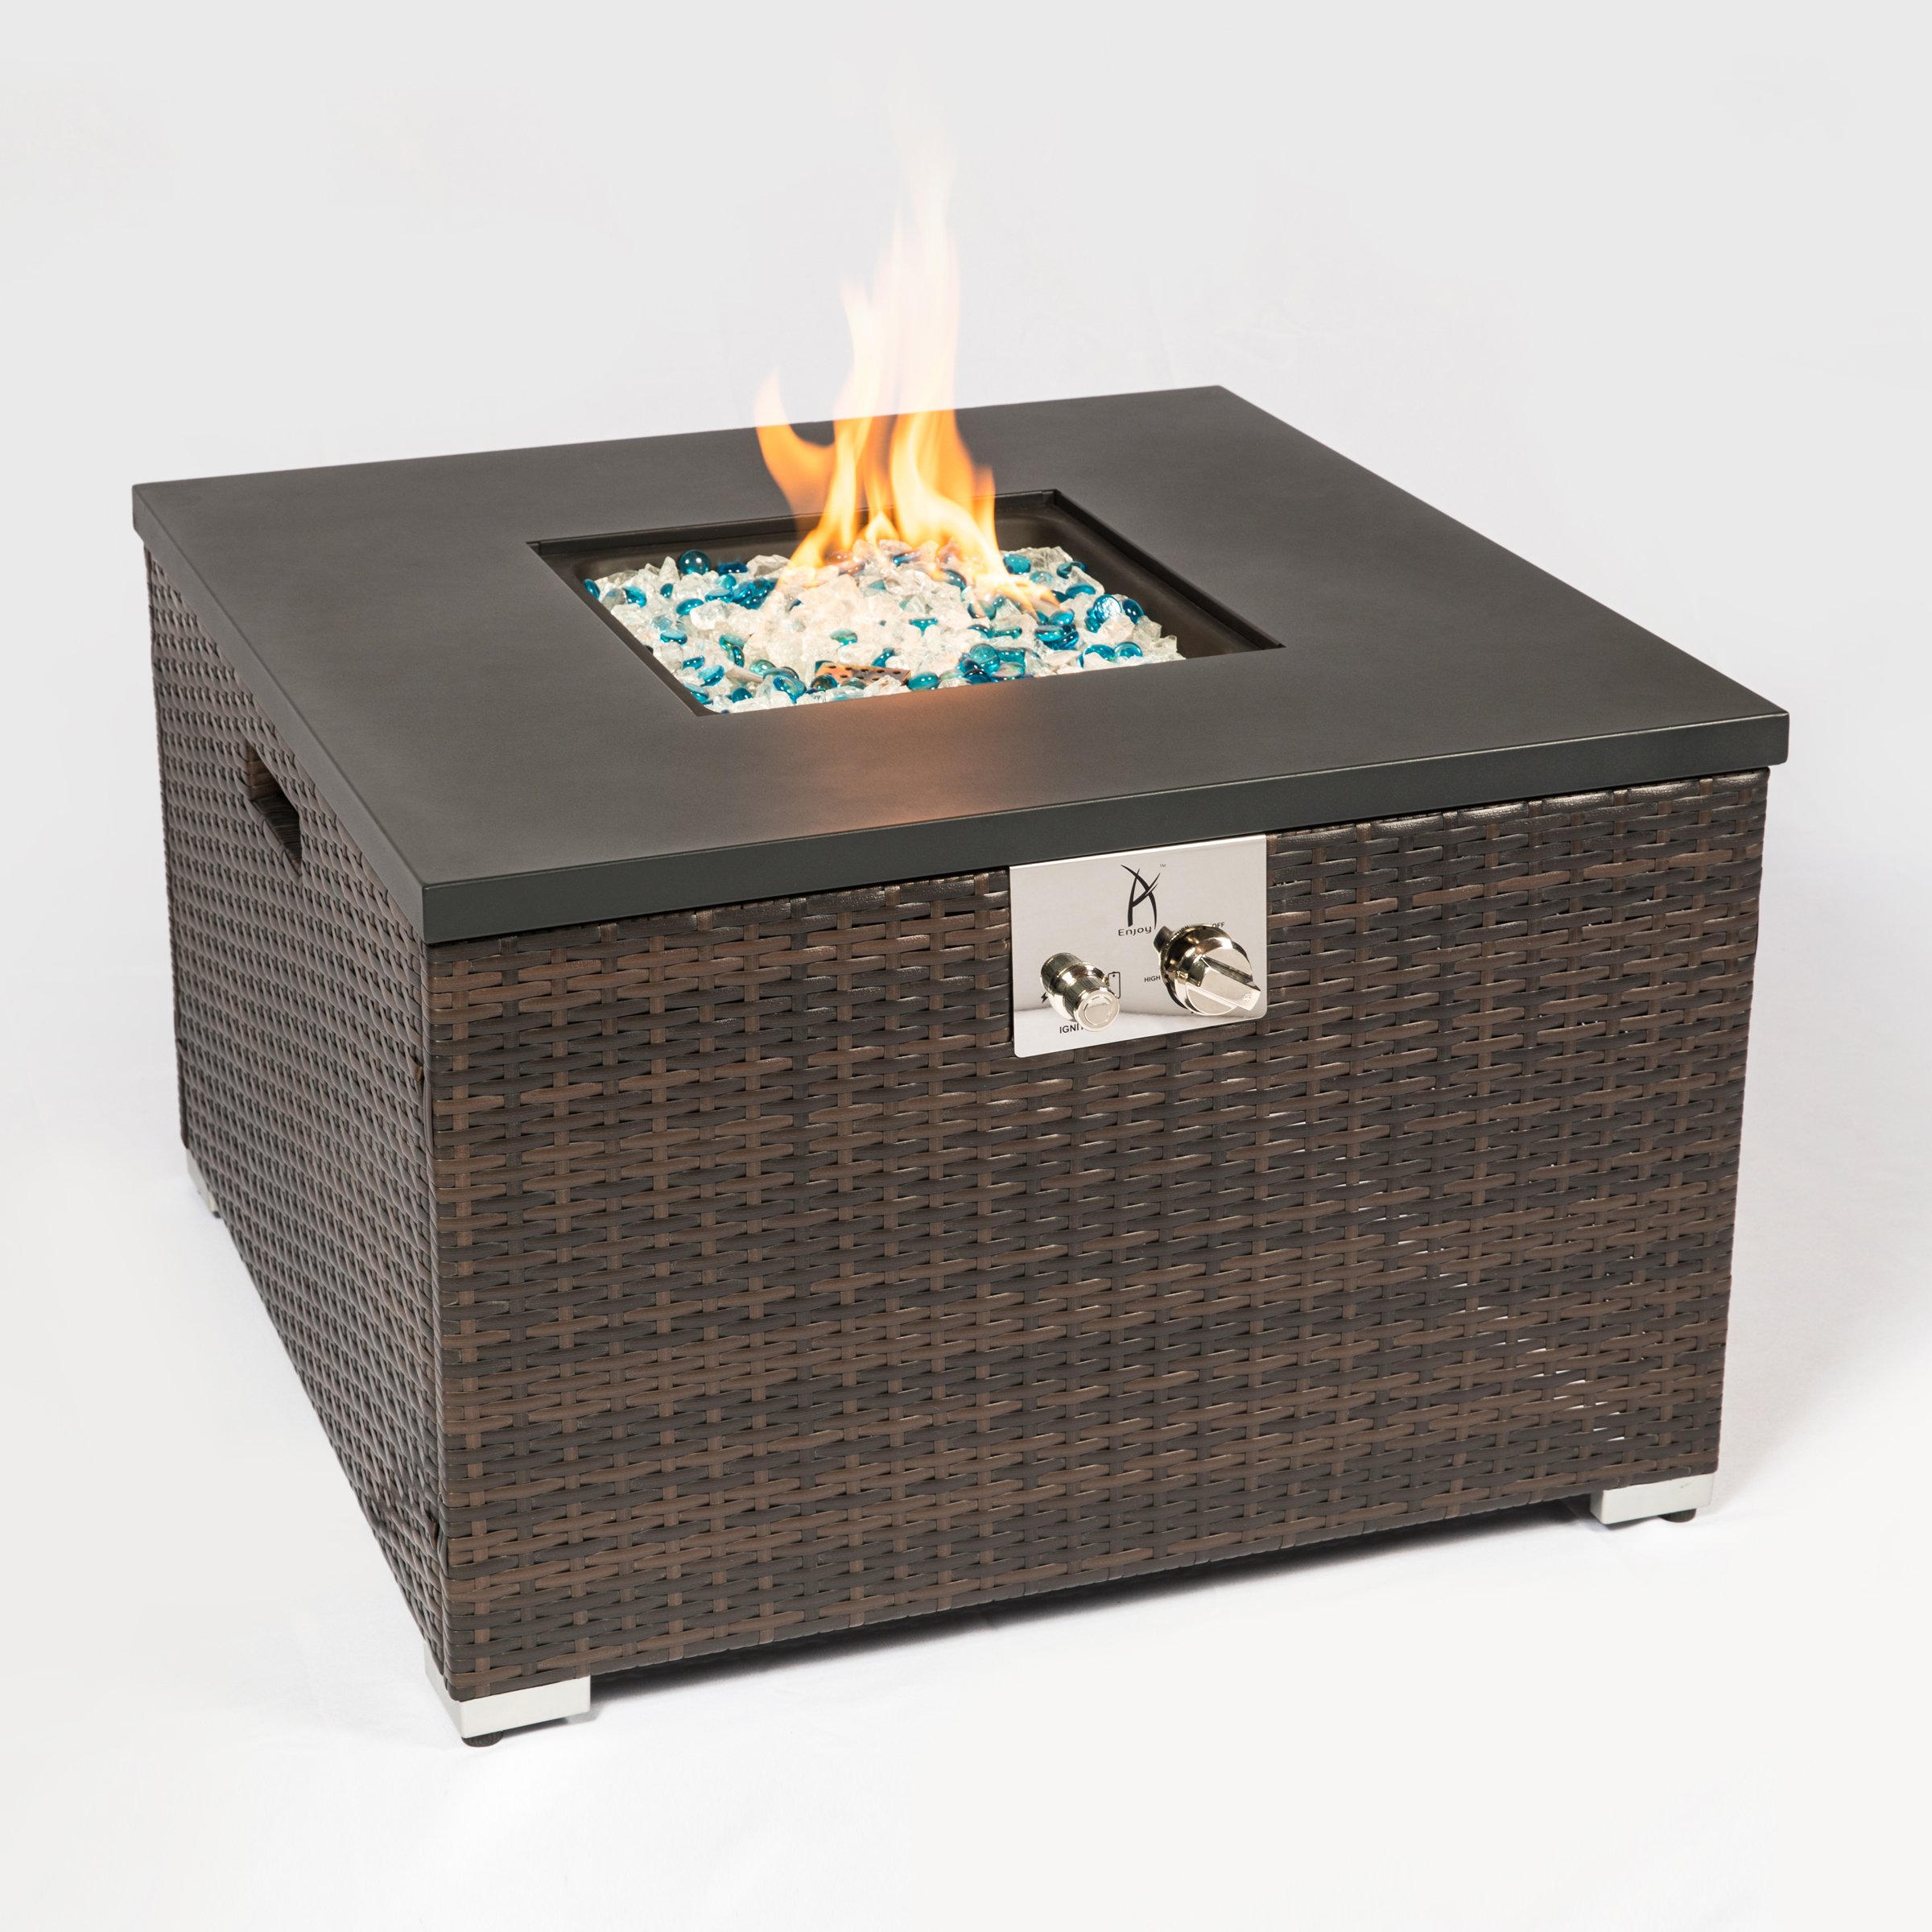 32inch Outdoor Gas Fire Pit with Glass Rocks in Mixing Colors and Metal Cover Lid and Waterproof Rain Cover-CASAINC